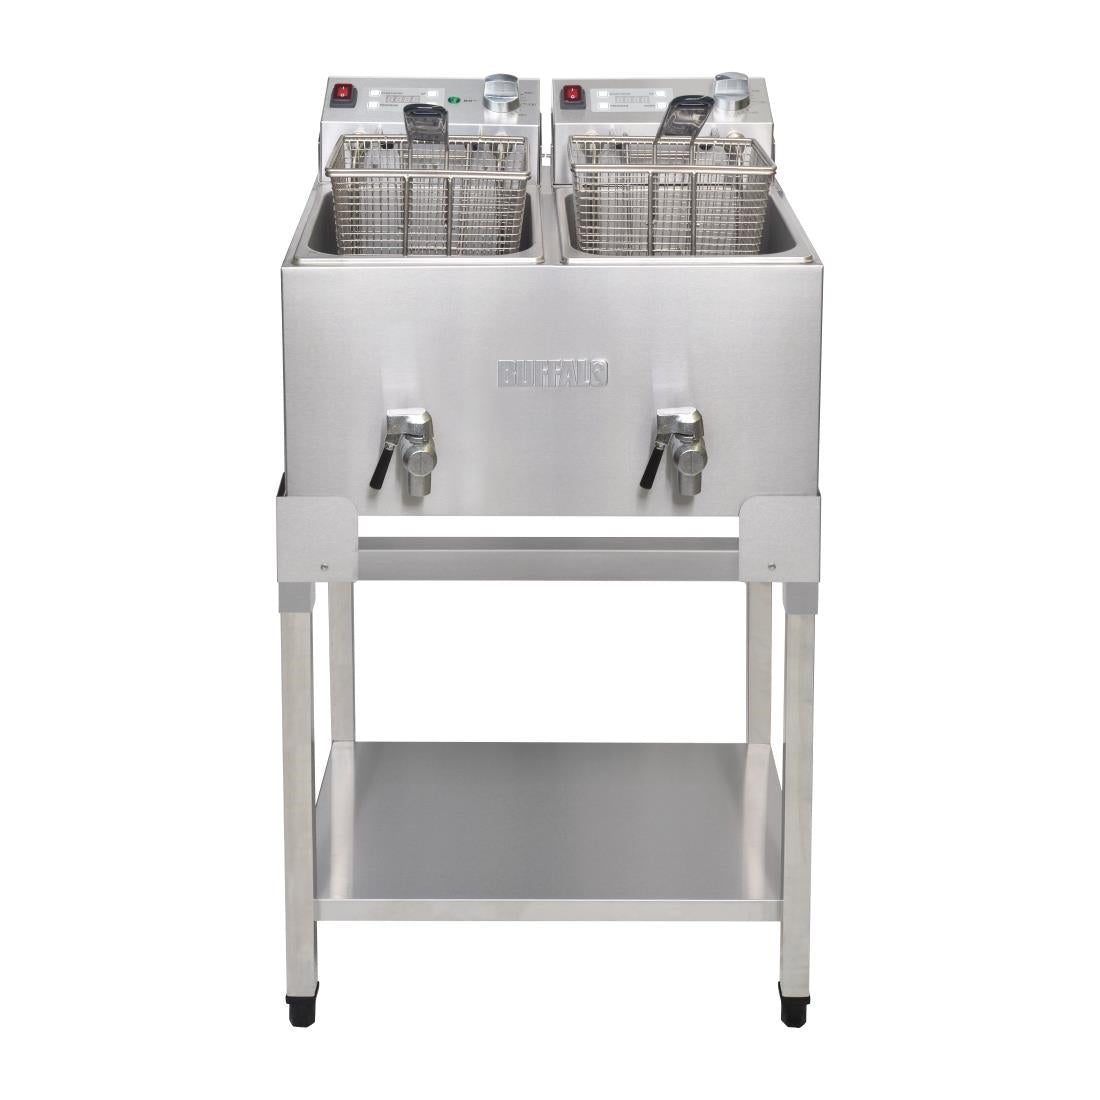 DF502 Buffalo Stand for Double Fryer (FC375 & FC377) JD Catering Equipment Solutions Ltd